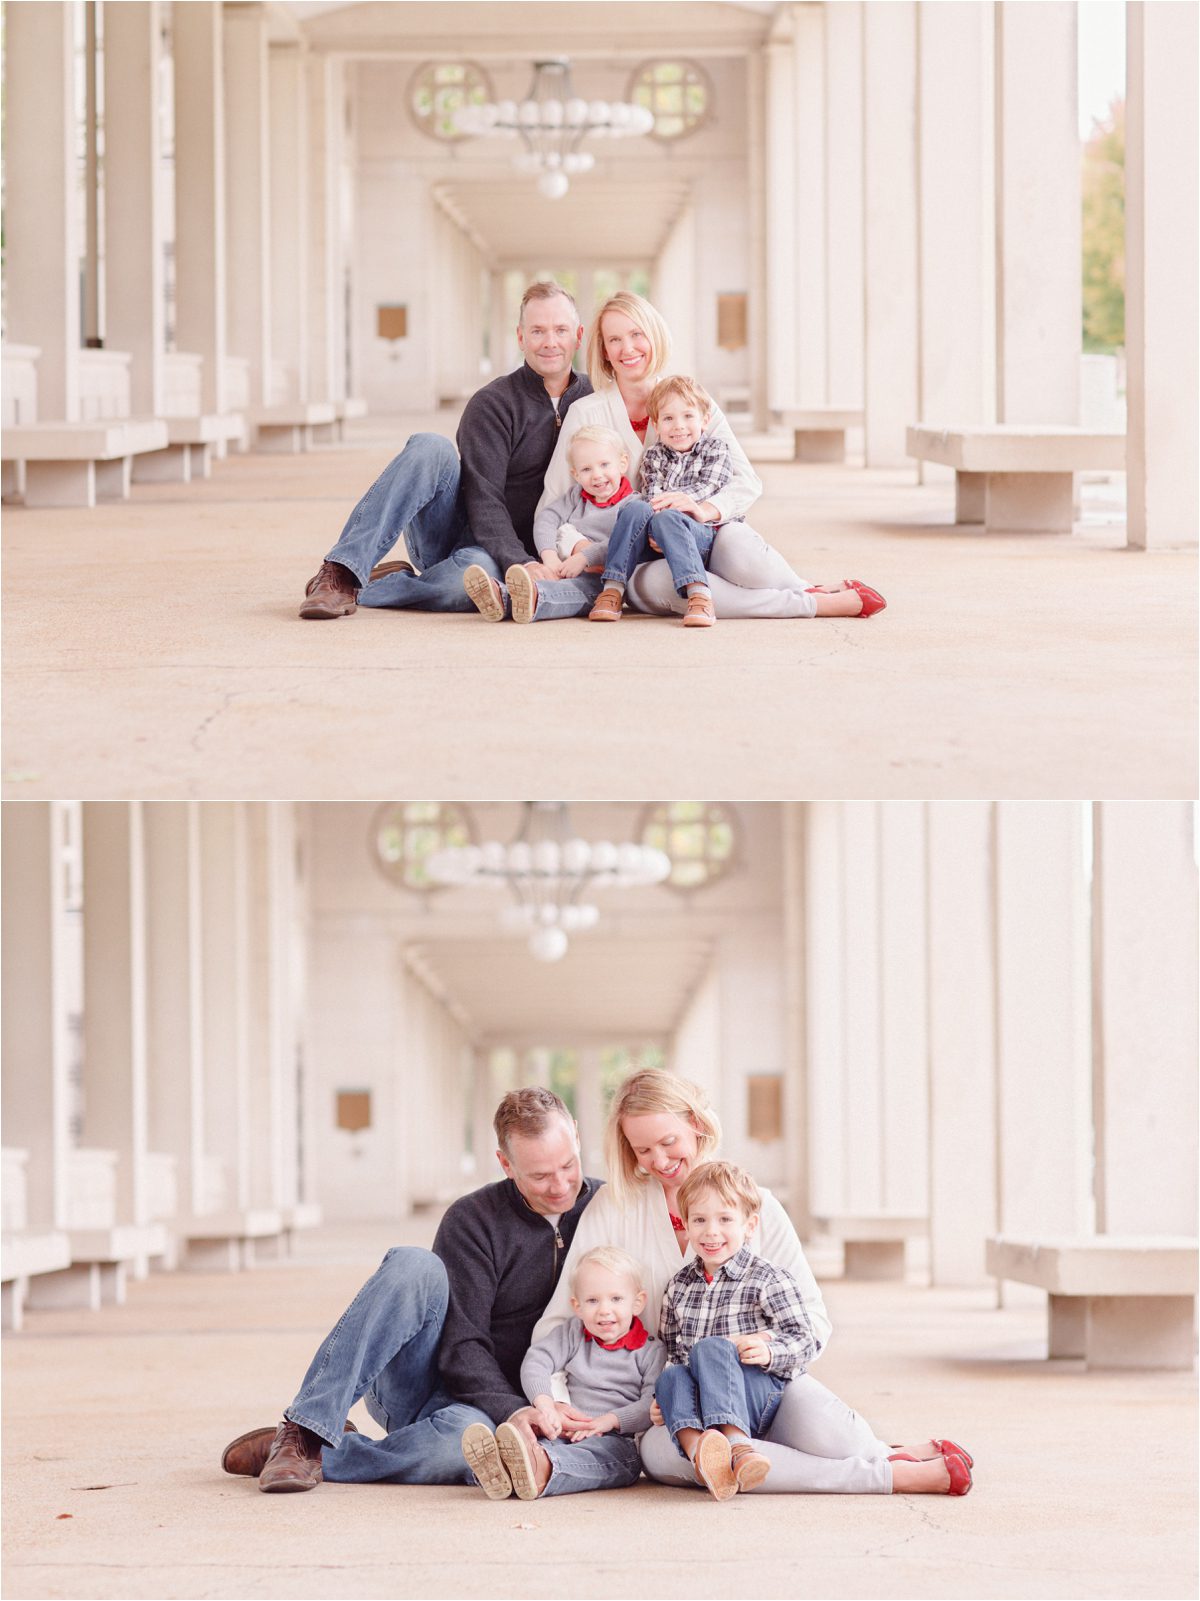 Family photographers portraits at the Muny in St. Louis.